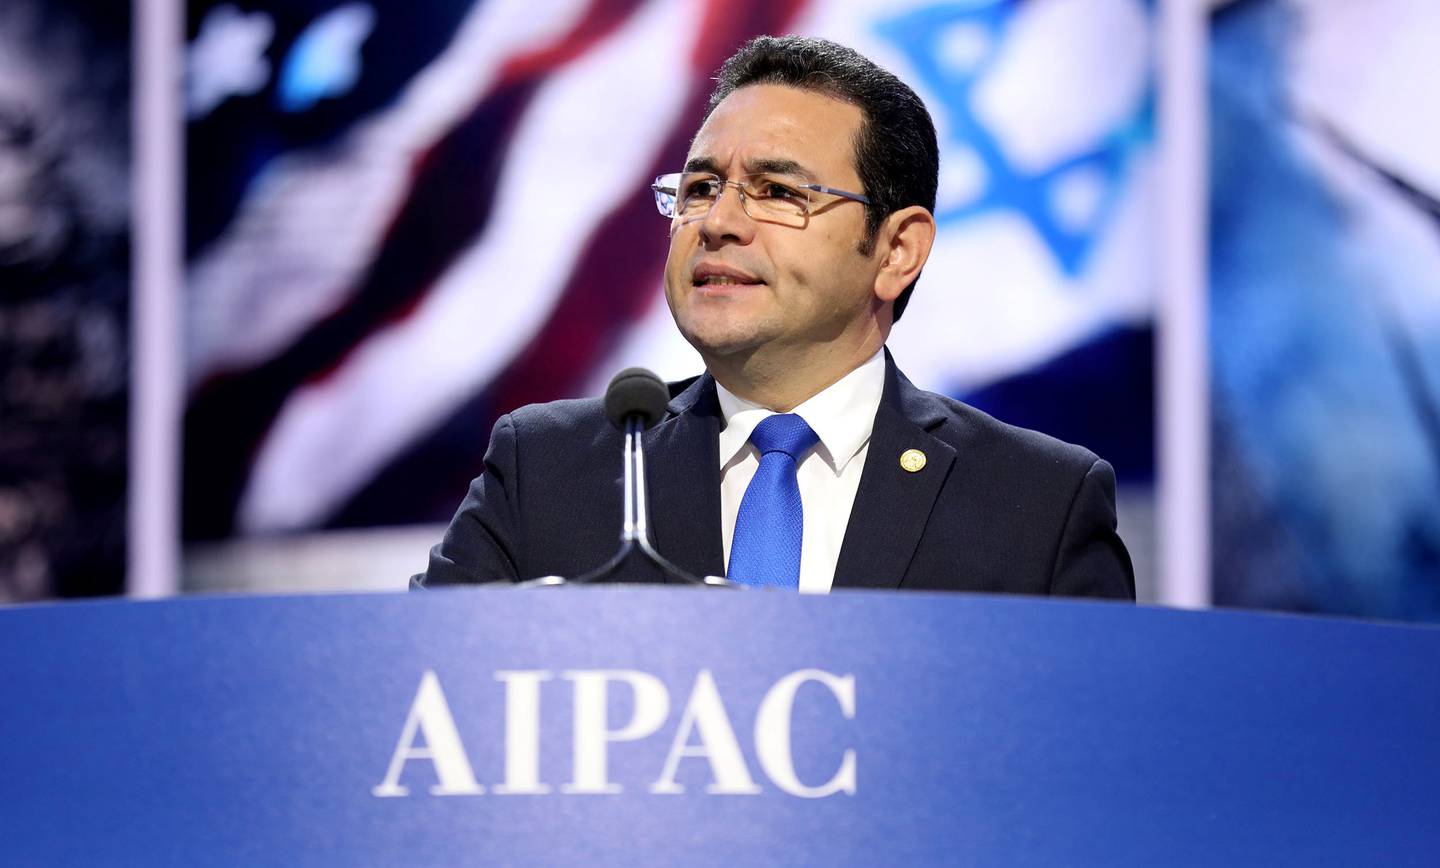 Guatemalan President Jimmy Morales speaks to the American Israel Public Affairs Committee AIPAC Policy Conference in Washington, DC, U.S. in this handout photograph released to Reuters by the Guatemala Presidency, March 4, 2018. Guatemala Presidency/Handout via REUTERS ATTENTION EDITORS - THIS IMAGE WAS PROVIDED BY A THIRD PARTY